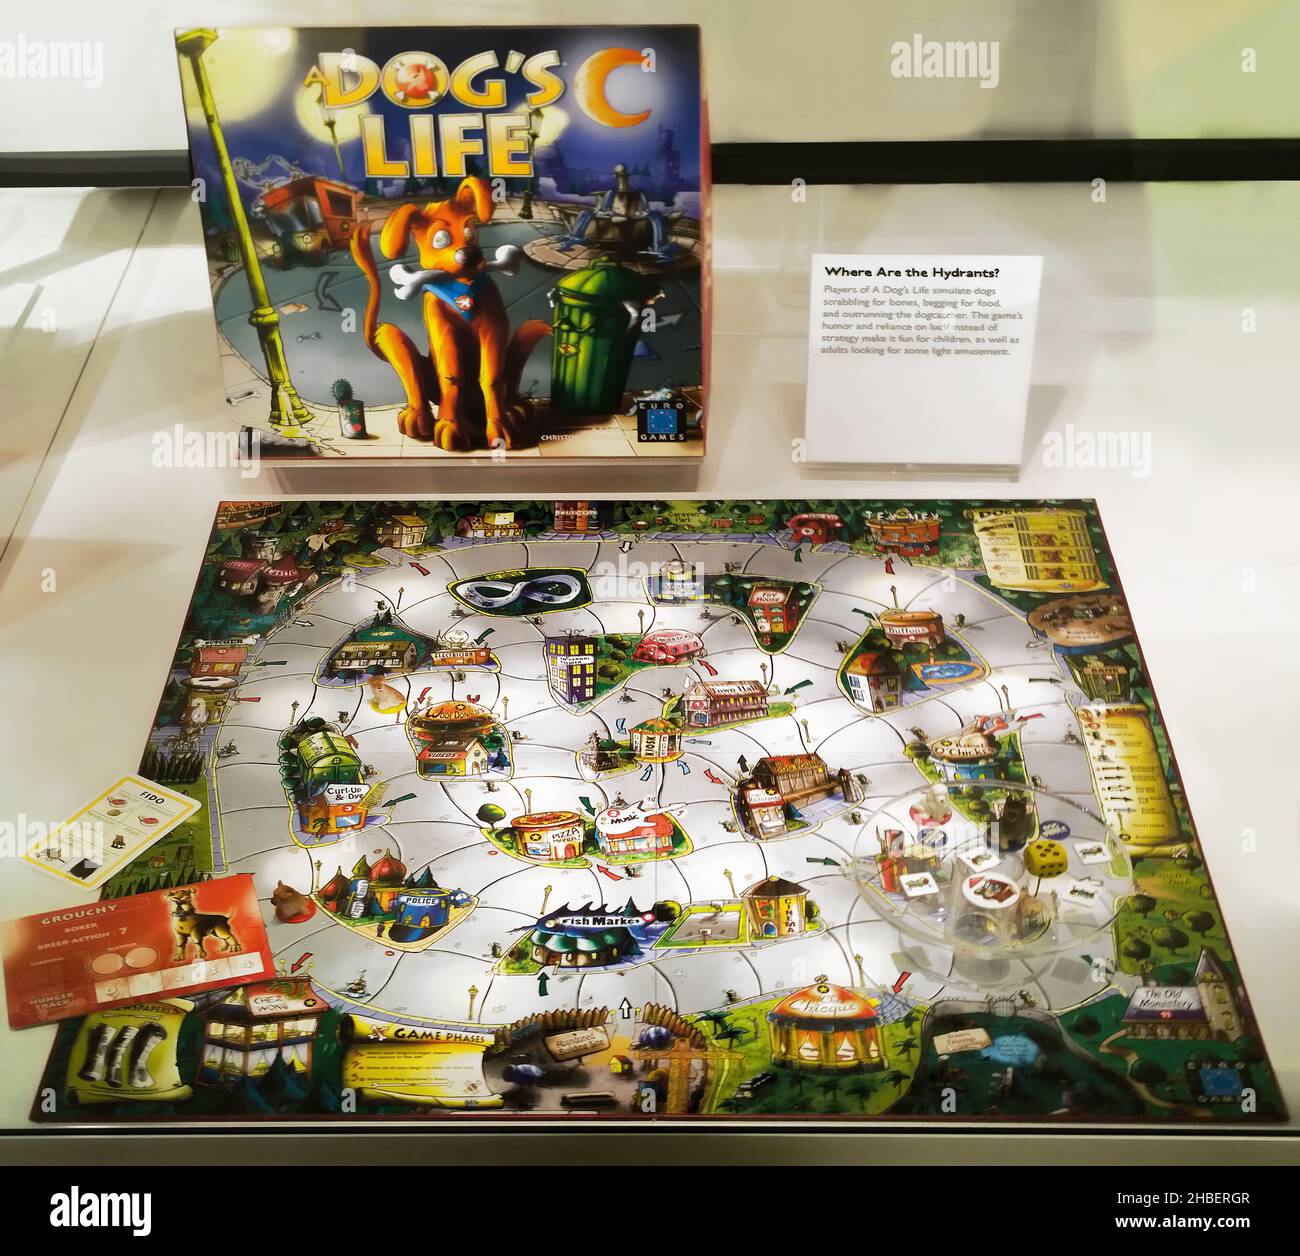 Rochester, New York, USA. December 16, 2021. A Dog's Life boardgame, circa 2001, on display at the Strong Museum of Play in Rochester, NY Stock Photo